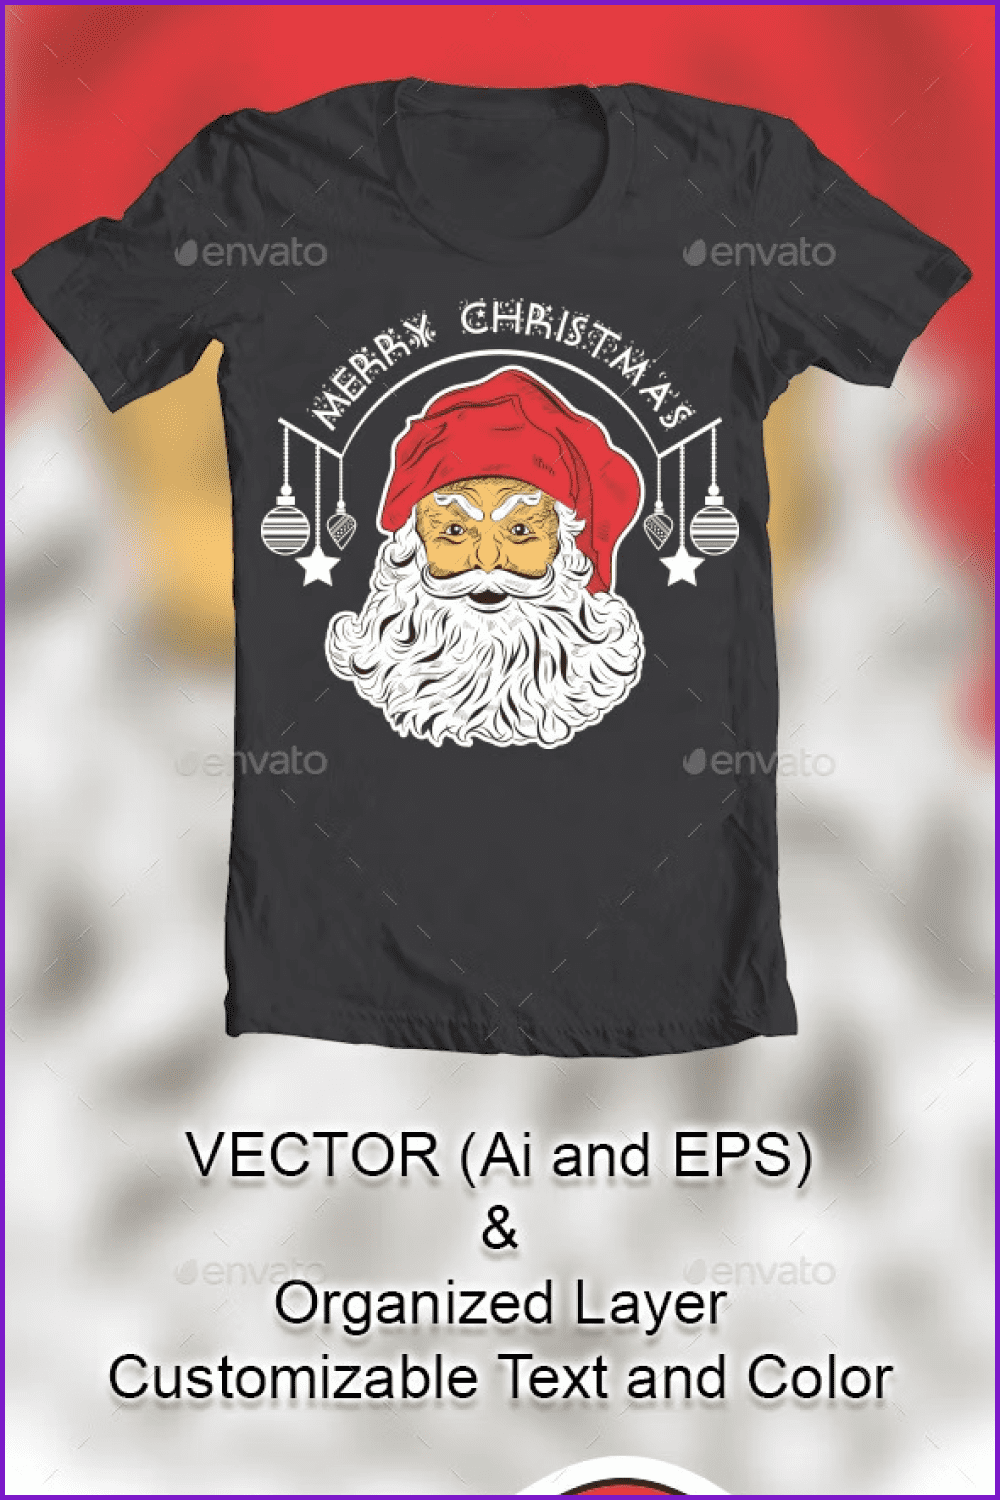 Black t-shirt with santa claus and christmas decorations.